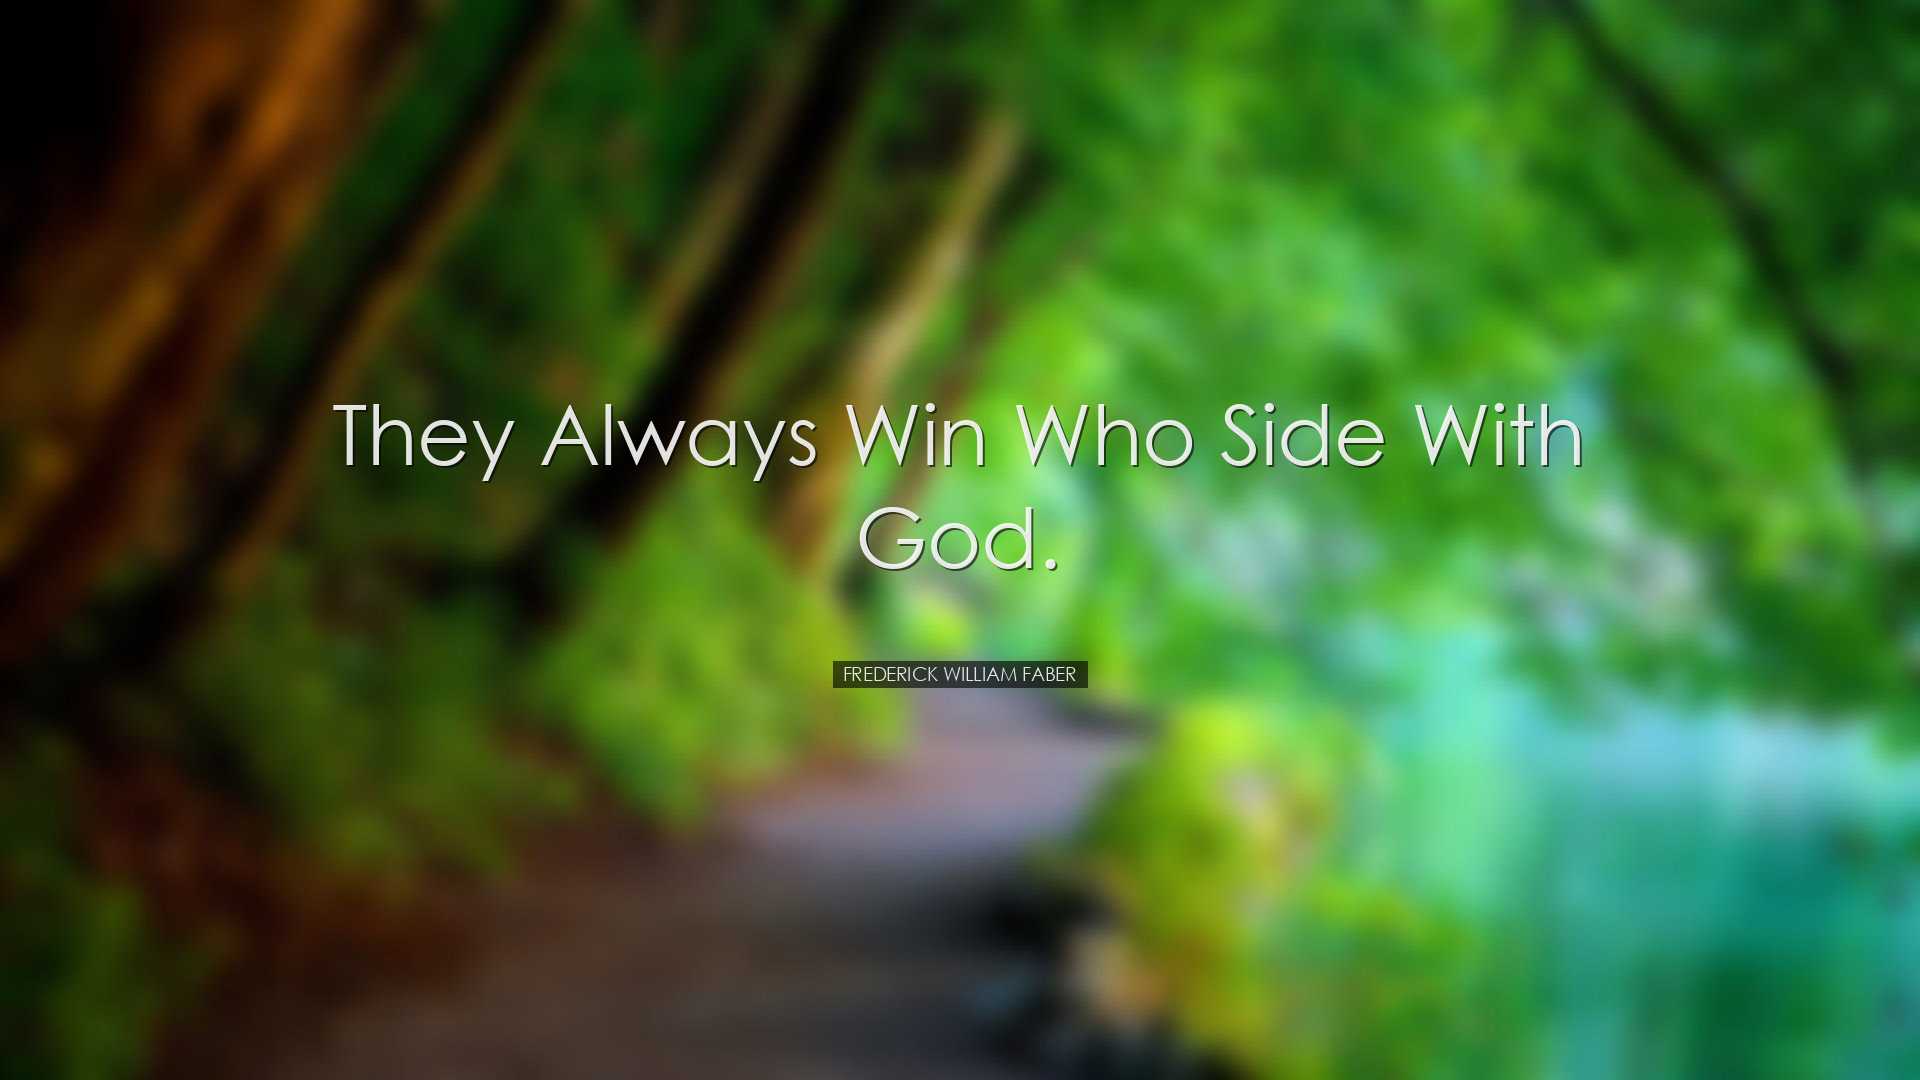 They always win who side with God. - Frederick William Faber